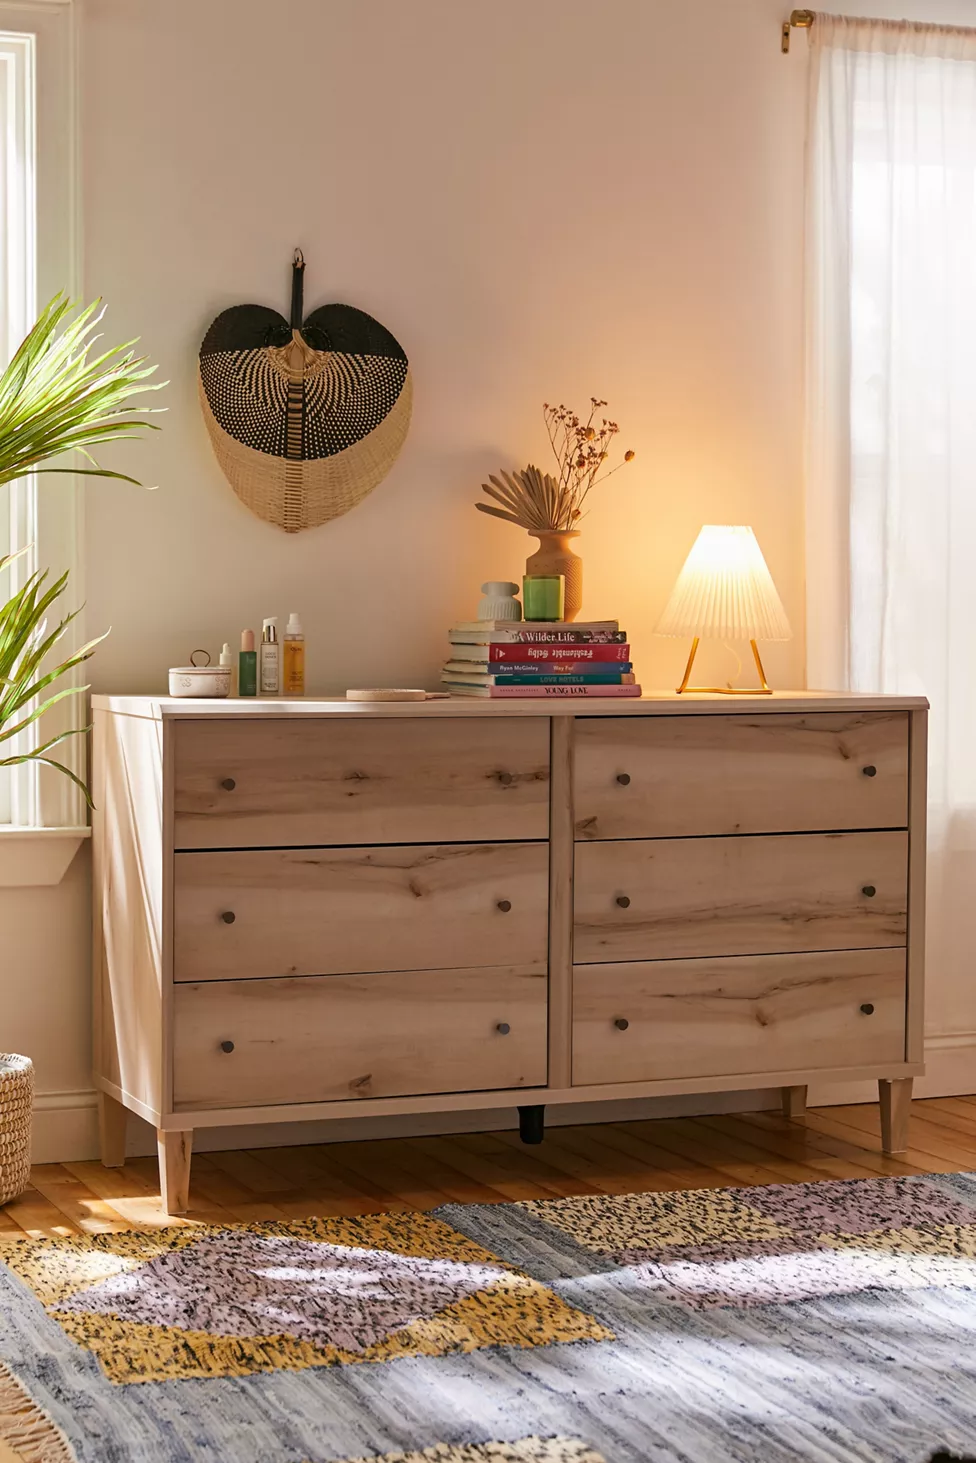 Warm Up the Grey with a Wooden Dresser